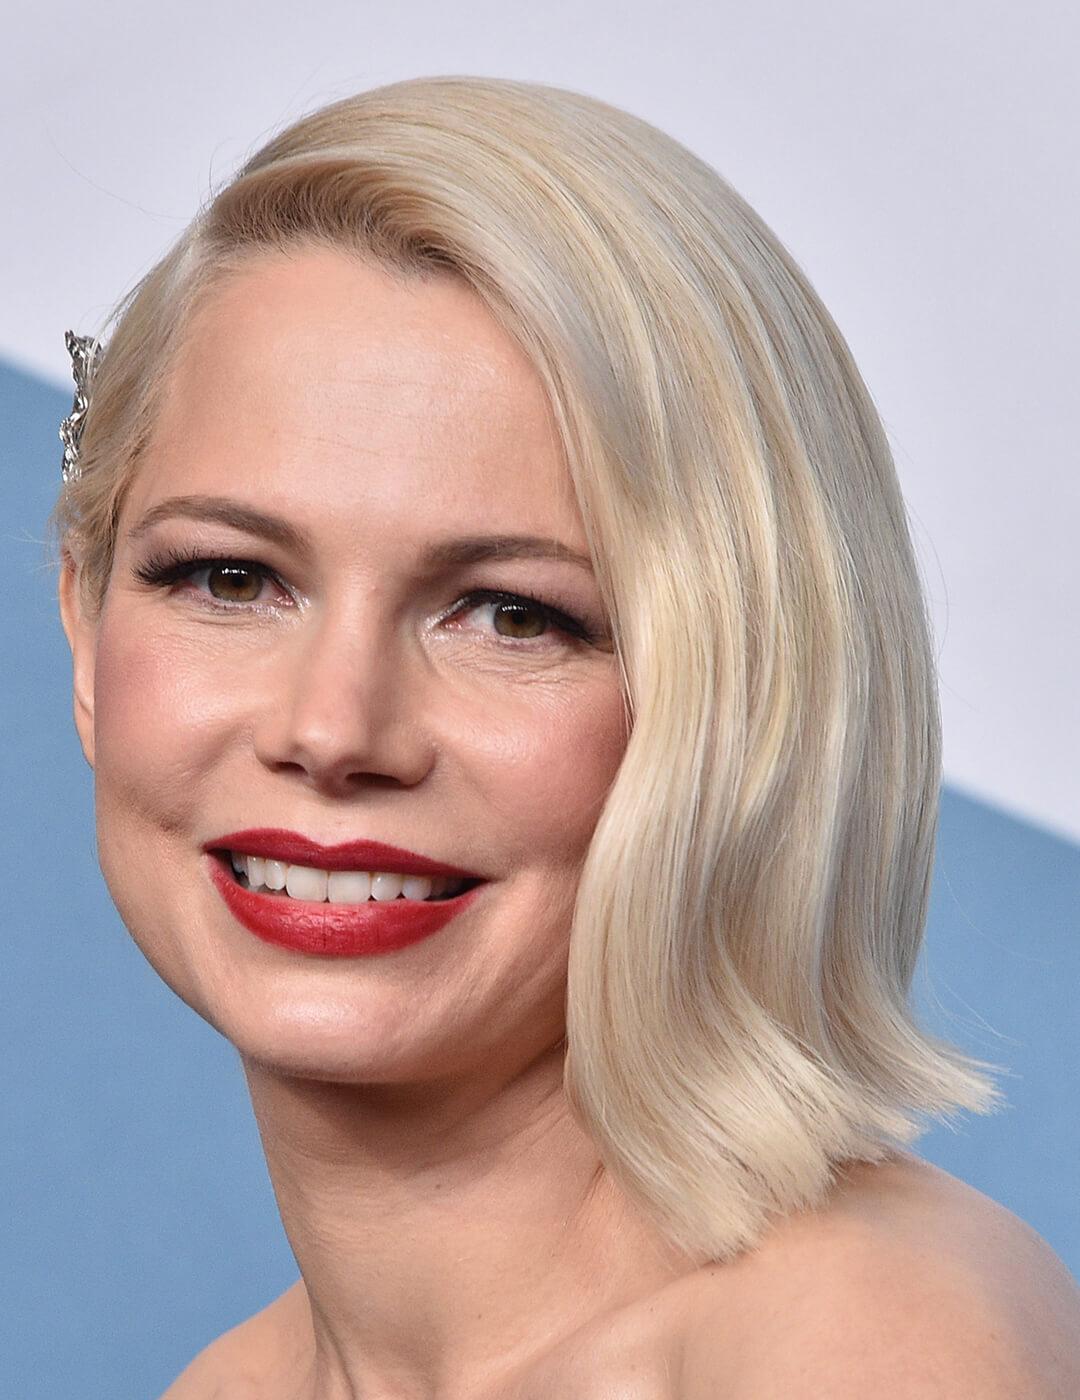 An image of Michelle Williams wearing a bold red lipstick with her hair tucked on the side of her face